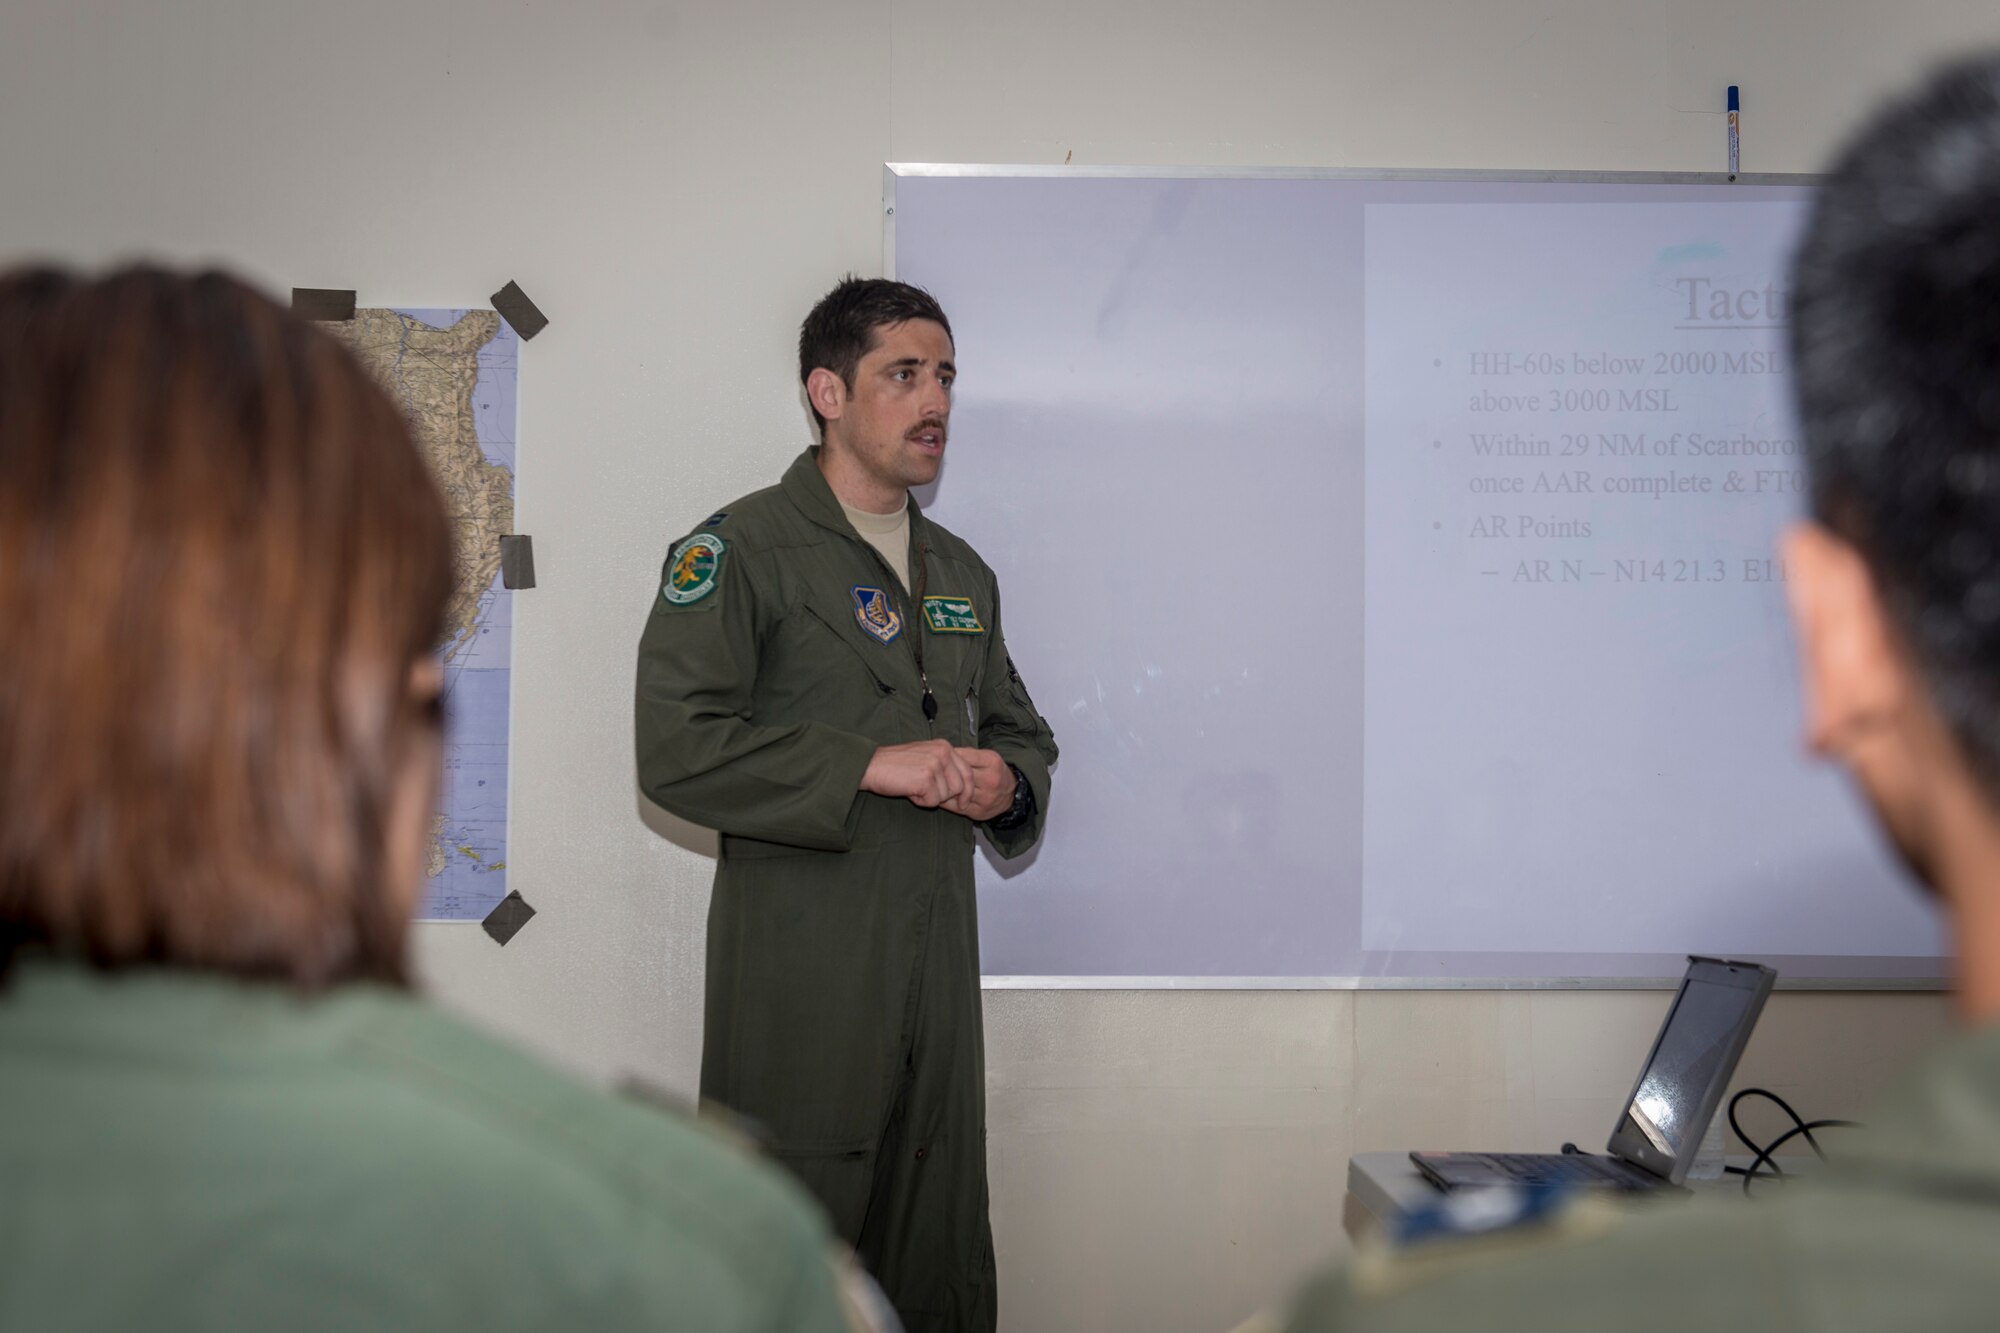 U.S. Air Force Capt. Tilt Culpepper, an A-10C Thunderbolt II pilot with the 25th Fighter Squadron, Osan Air Base, Republic of Korea, briefs U.S. Philippine Air Force (PAF) aircrew members on the mission of the A-10 as part of U.S. Pacific Command’s Air Contingent at Clark Air Base, Philippines, April 28, 2016. The briefing afforded PAF aircrew members an opportunity to experience how U.S. Air Force aircrew members operate the airframe. The A-10C has a mission profile consistent with the air and maritime domain awareness operations U.S. Pacific Command’s Air Contingent is conducting out of the air base, as it is capable of loitering close to the surface for extended periods to allow for excellent visibility over land and sea domains. This bilateral engagement strengthened the already close partnership between U.S. and Philippine armed forces. (U.S. Air Force photo by Staff Sgt. Benjamin W. Stratton)
